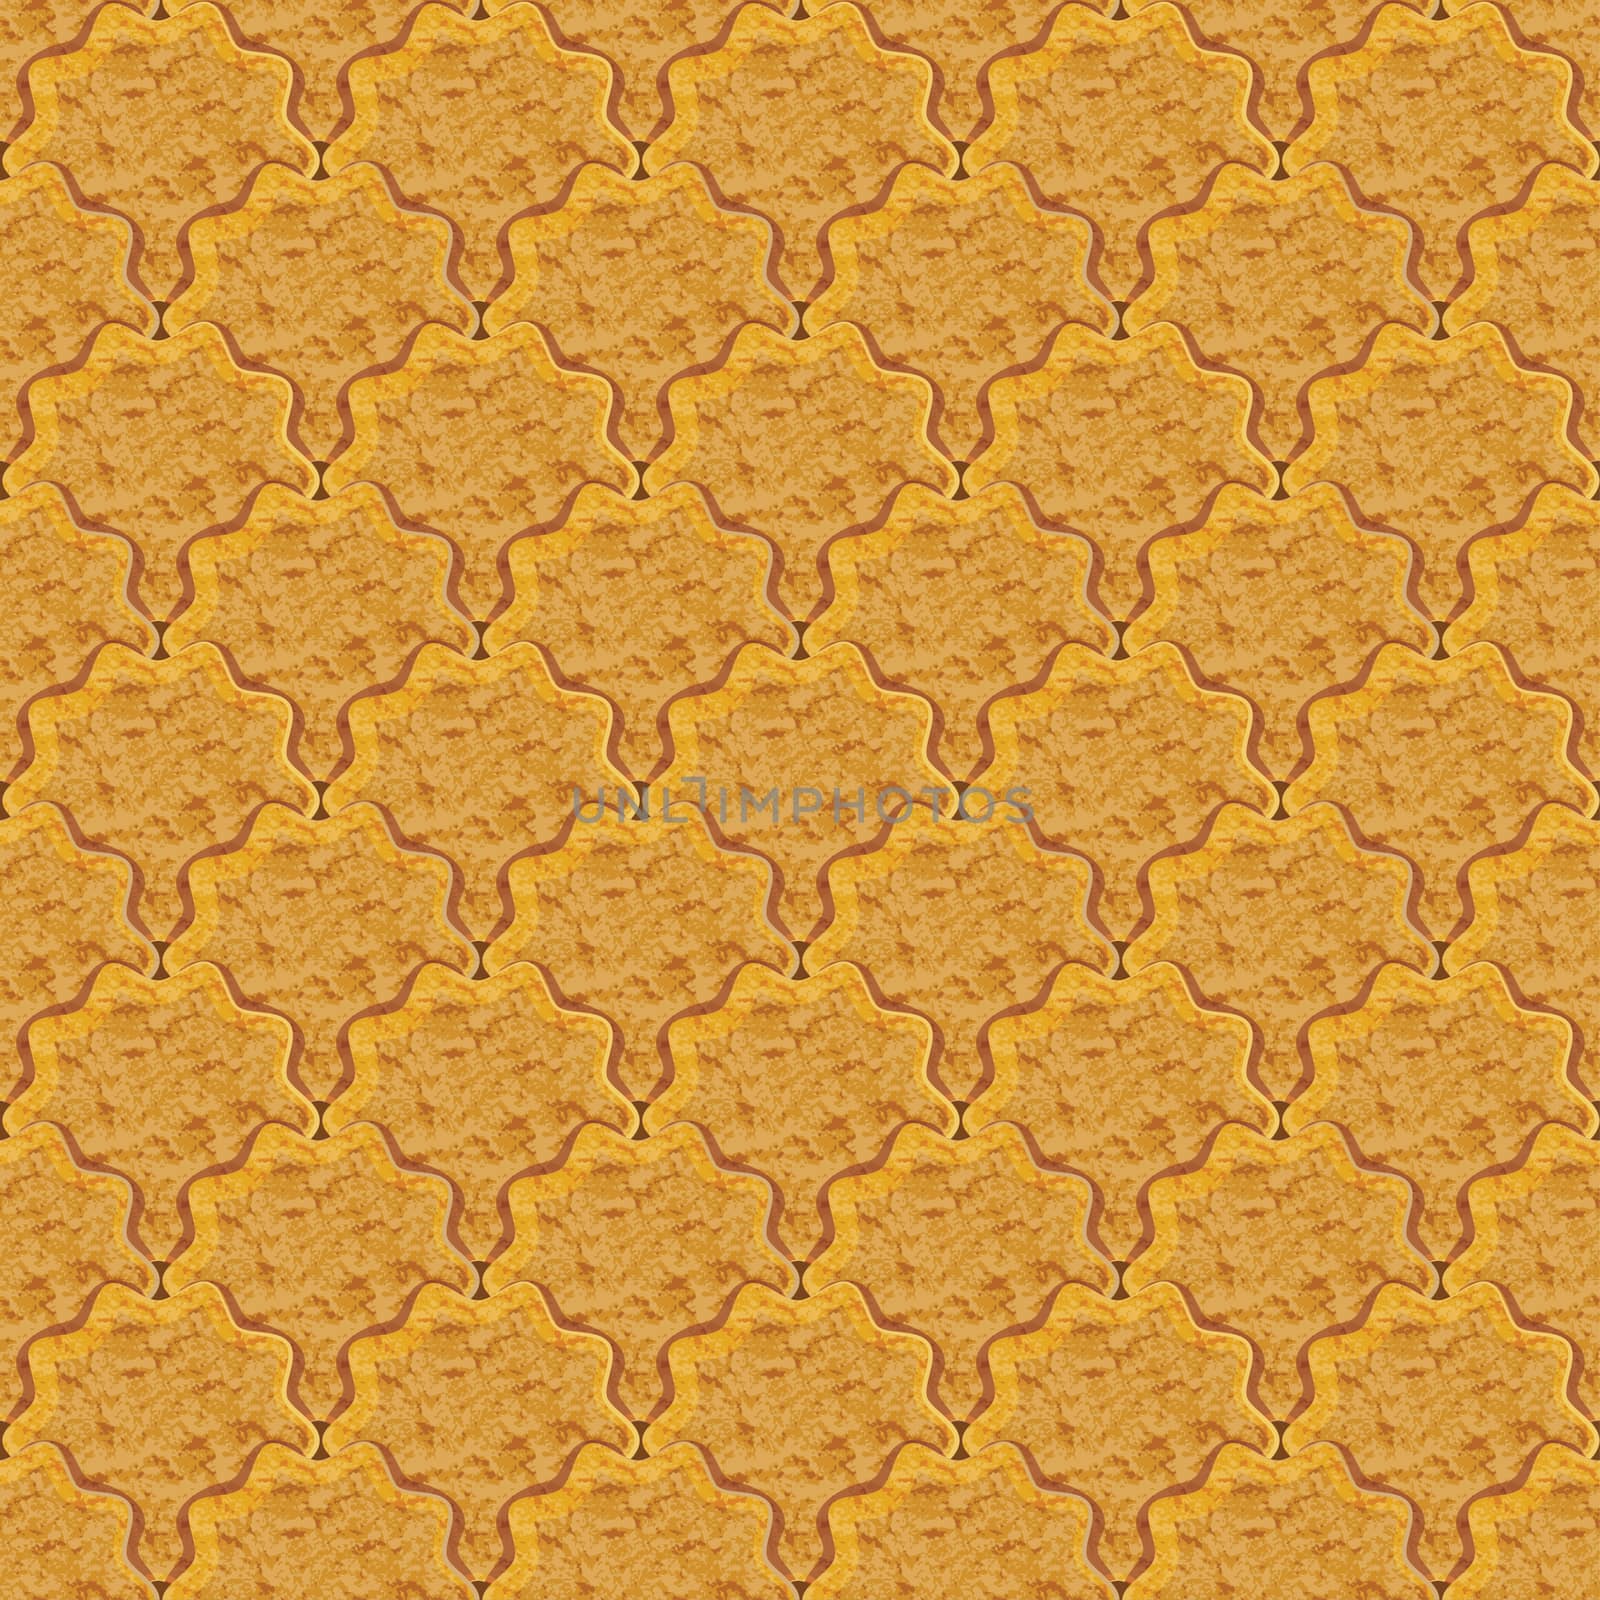 Rasterized graphic seamless background of cookies crackers